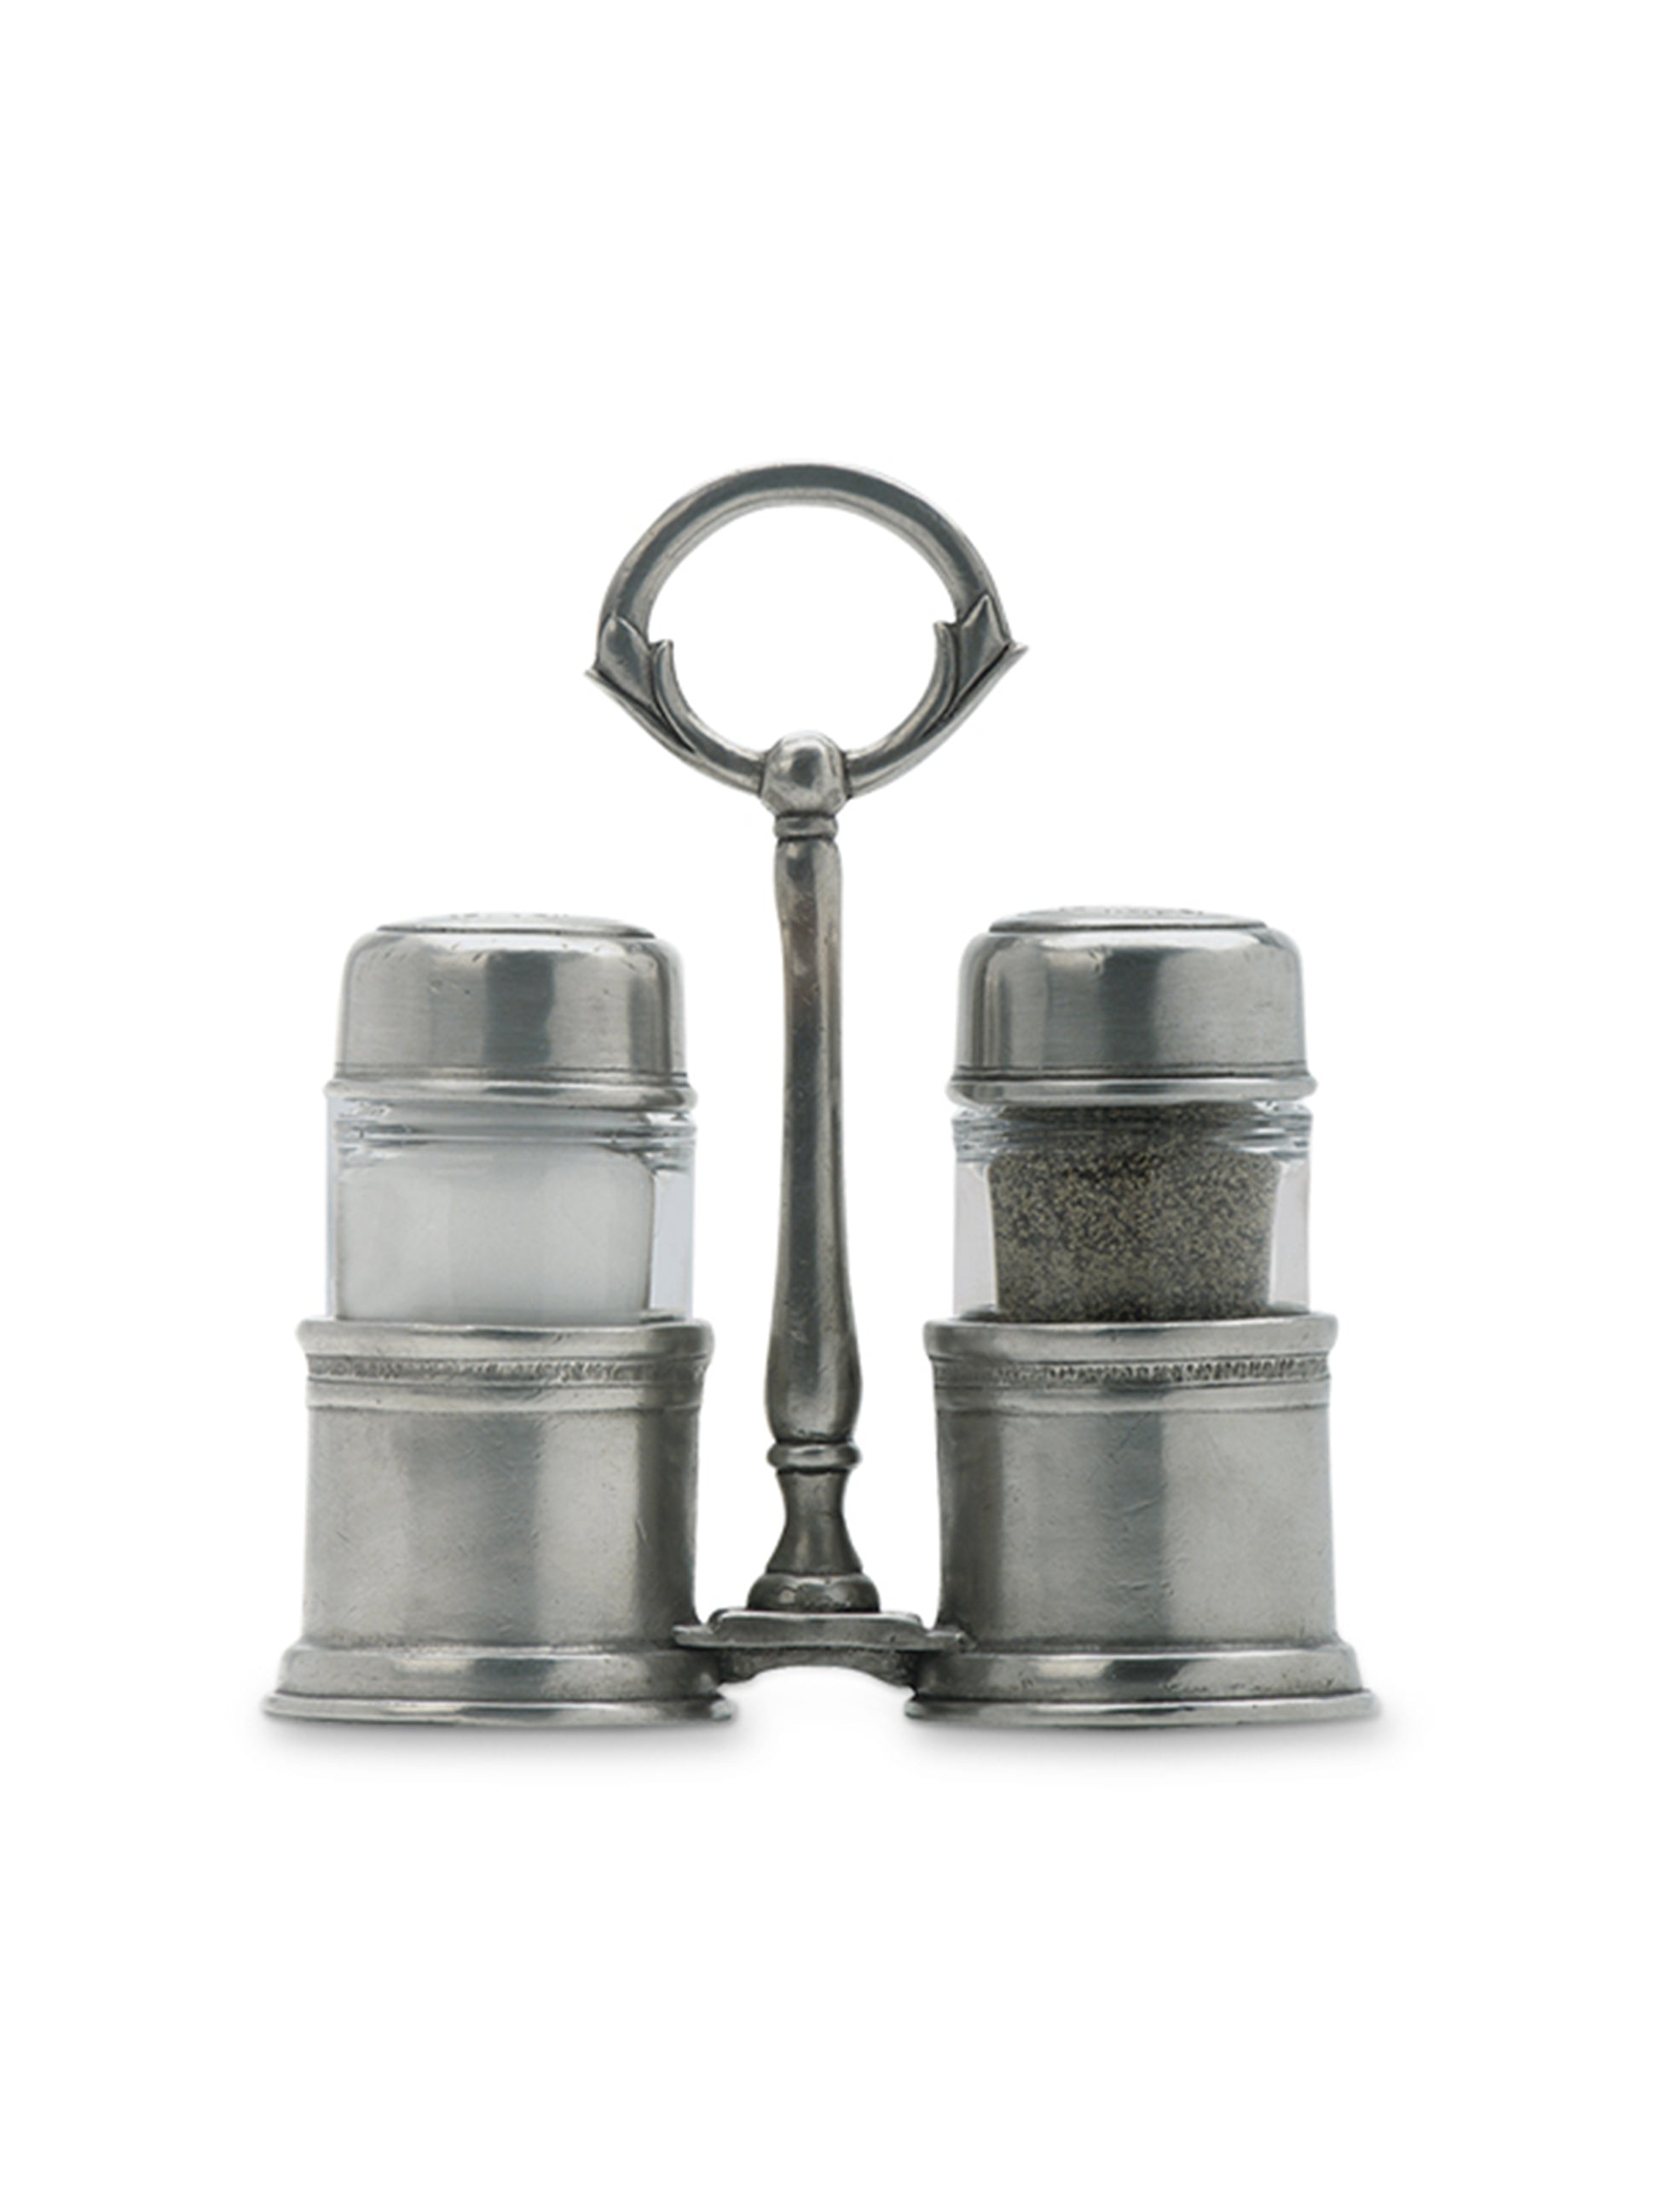 MATCH Pewter Salt and Pepper Caddy Weston Table